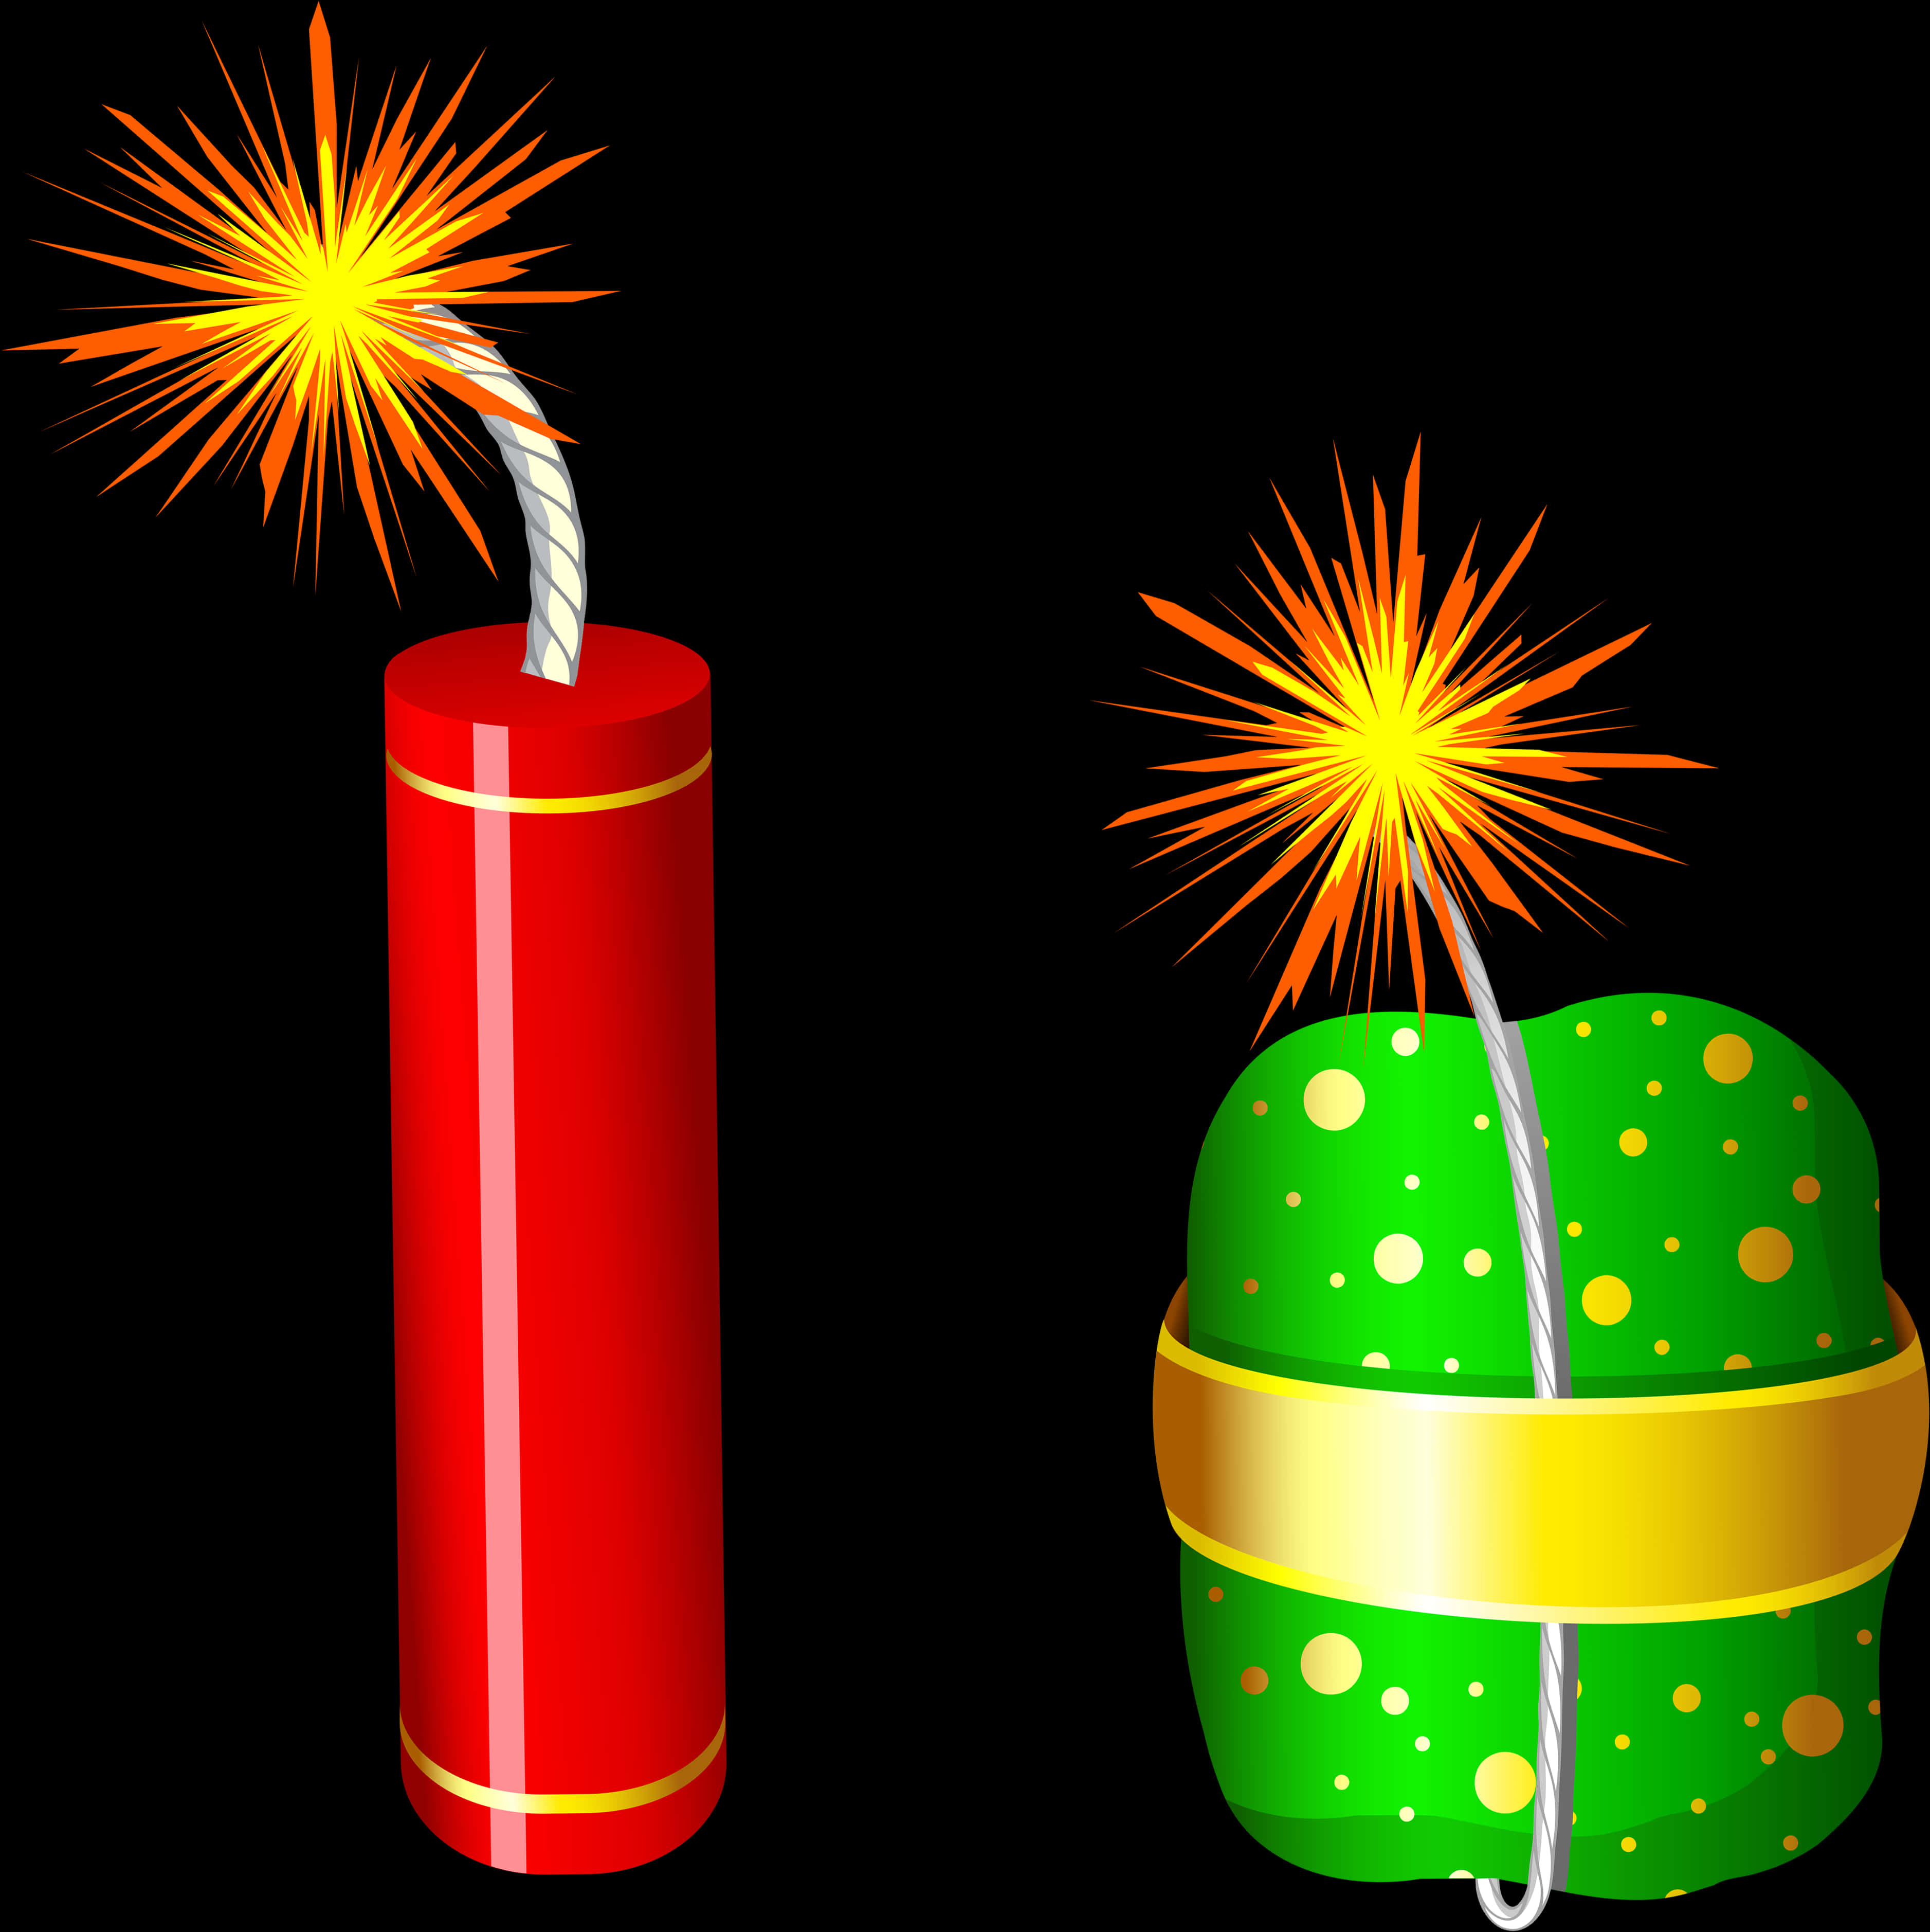 A Red And Green Dynamite With A Yellow Cord